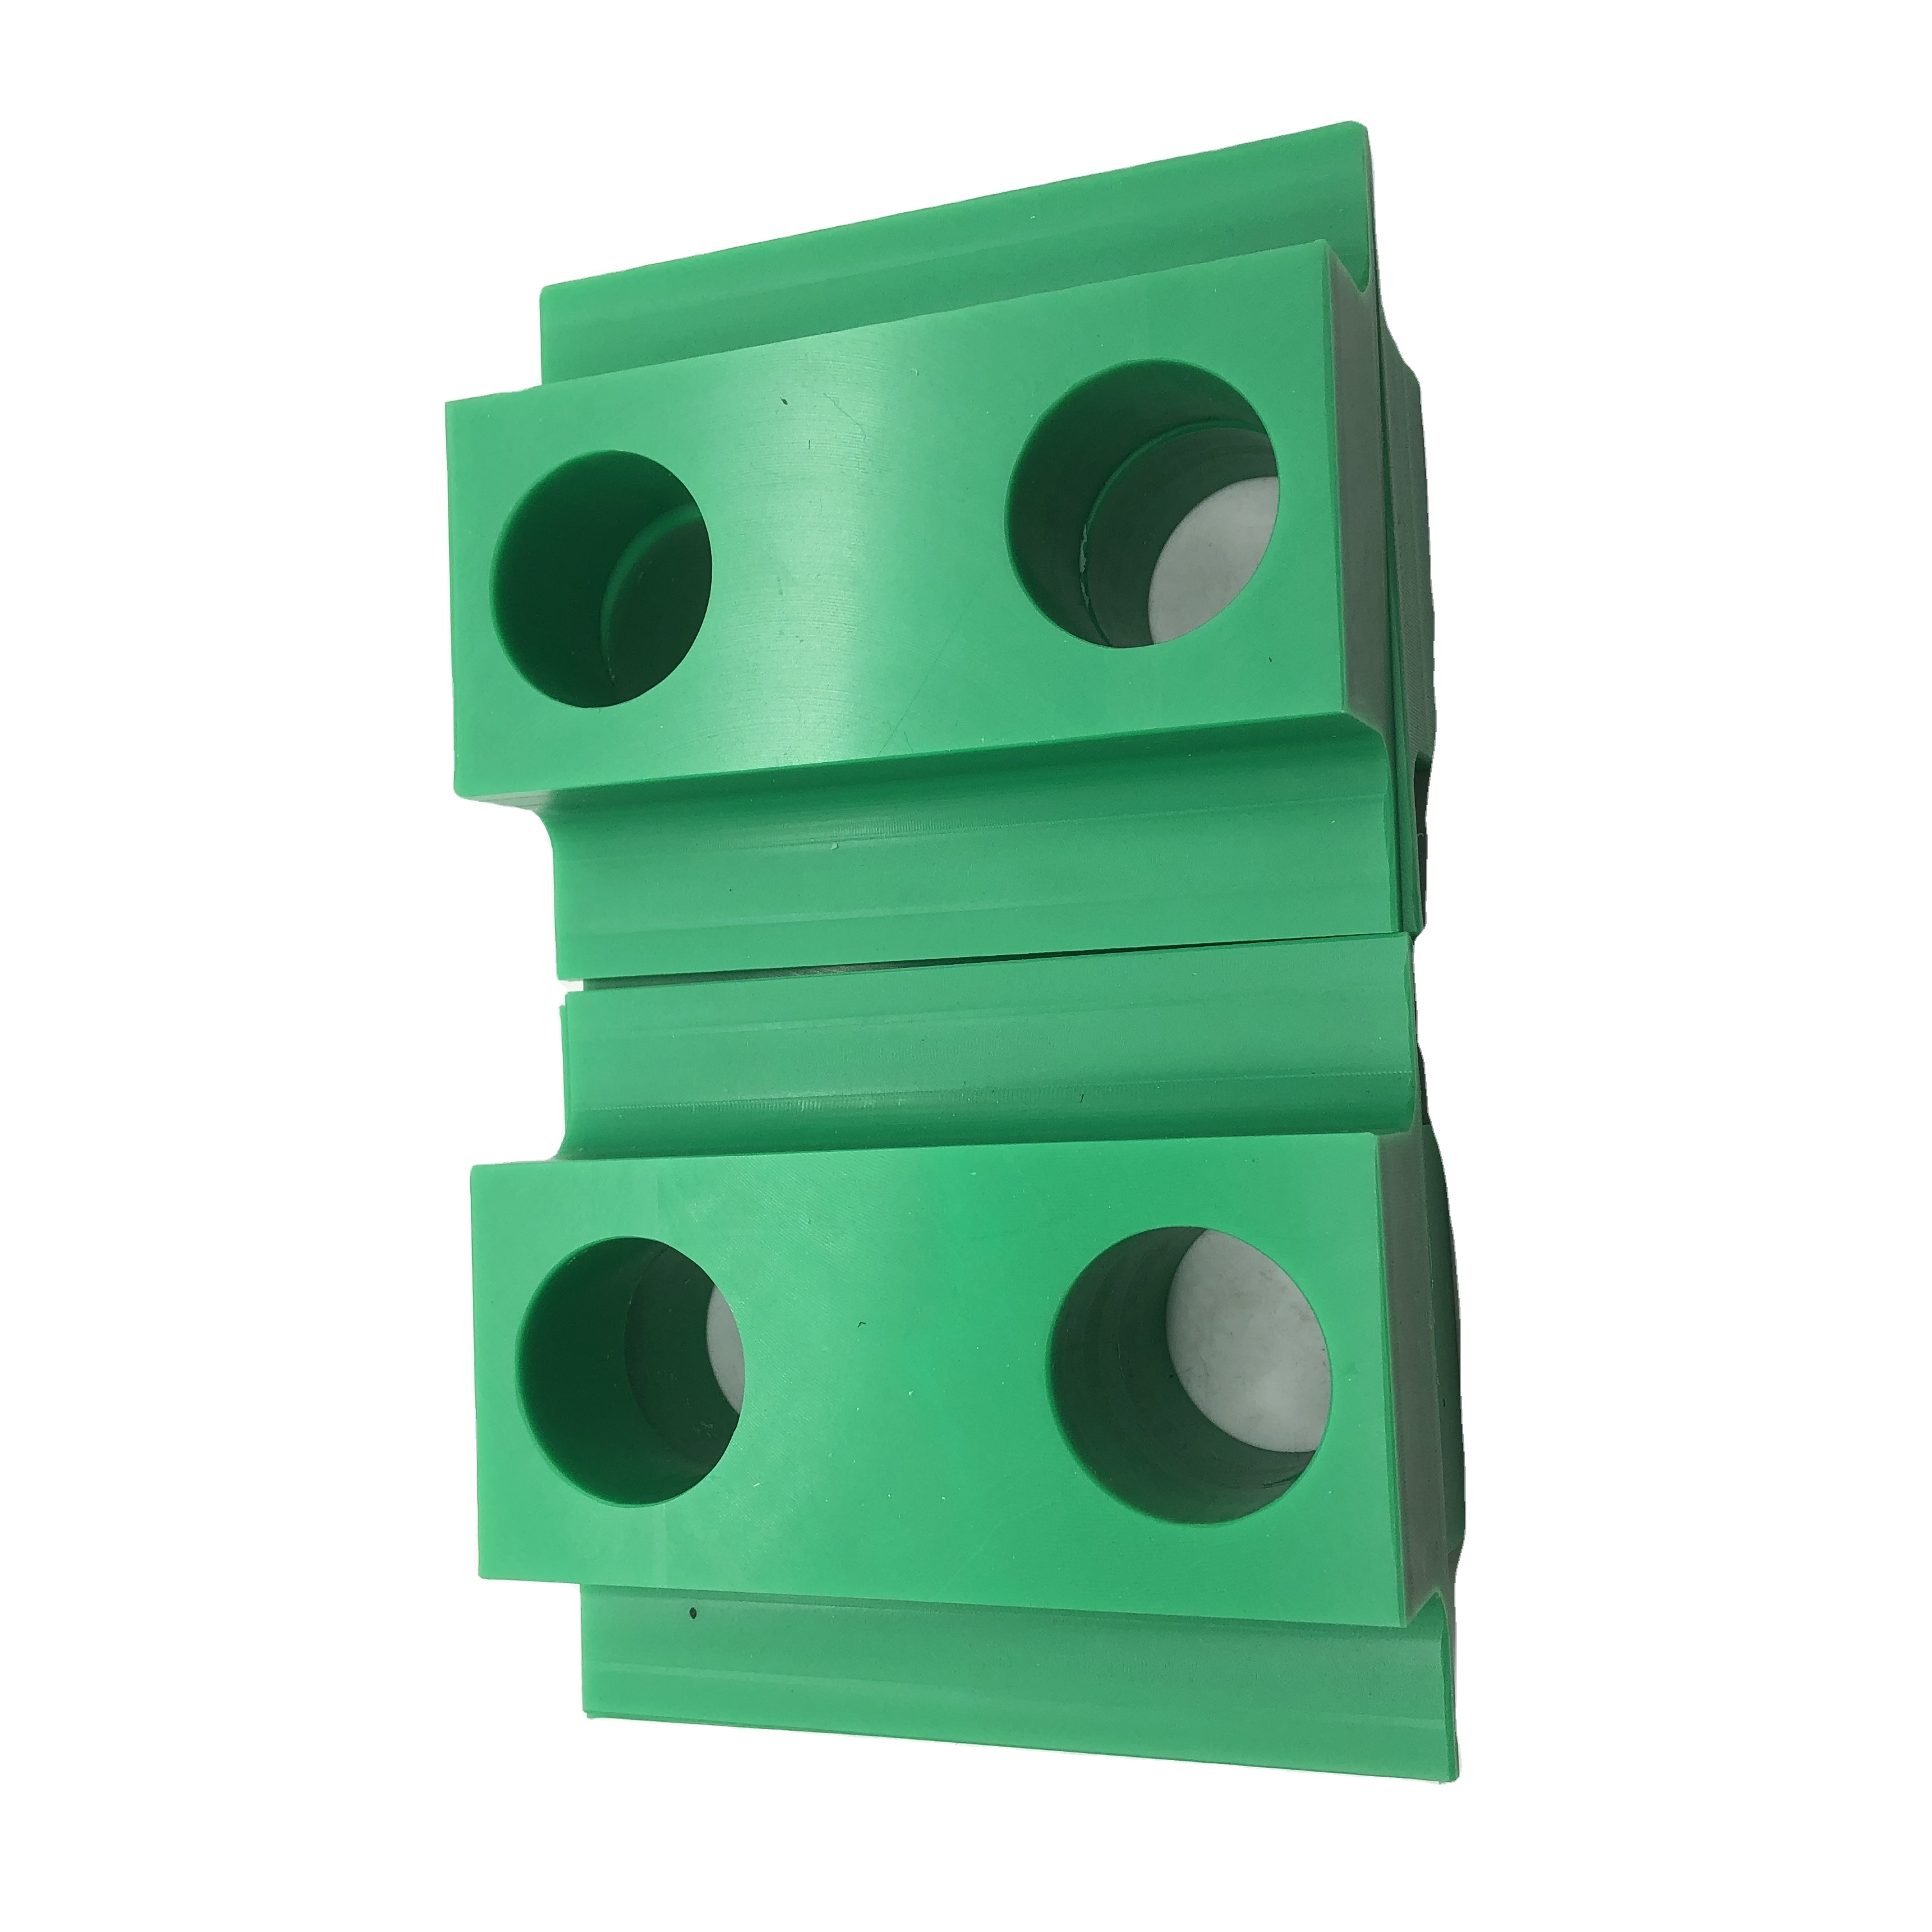 UHMWPE and HDPE wear parts